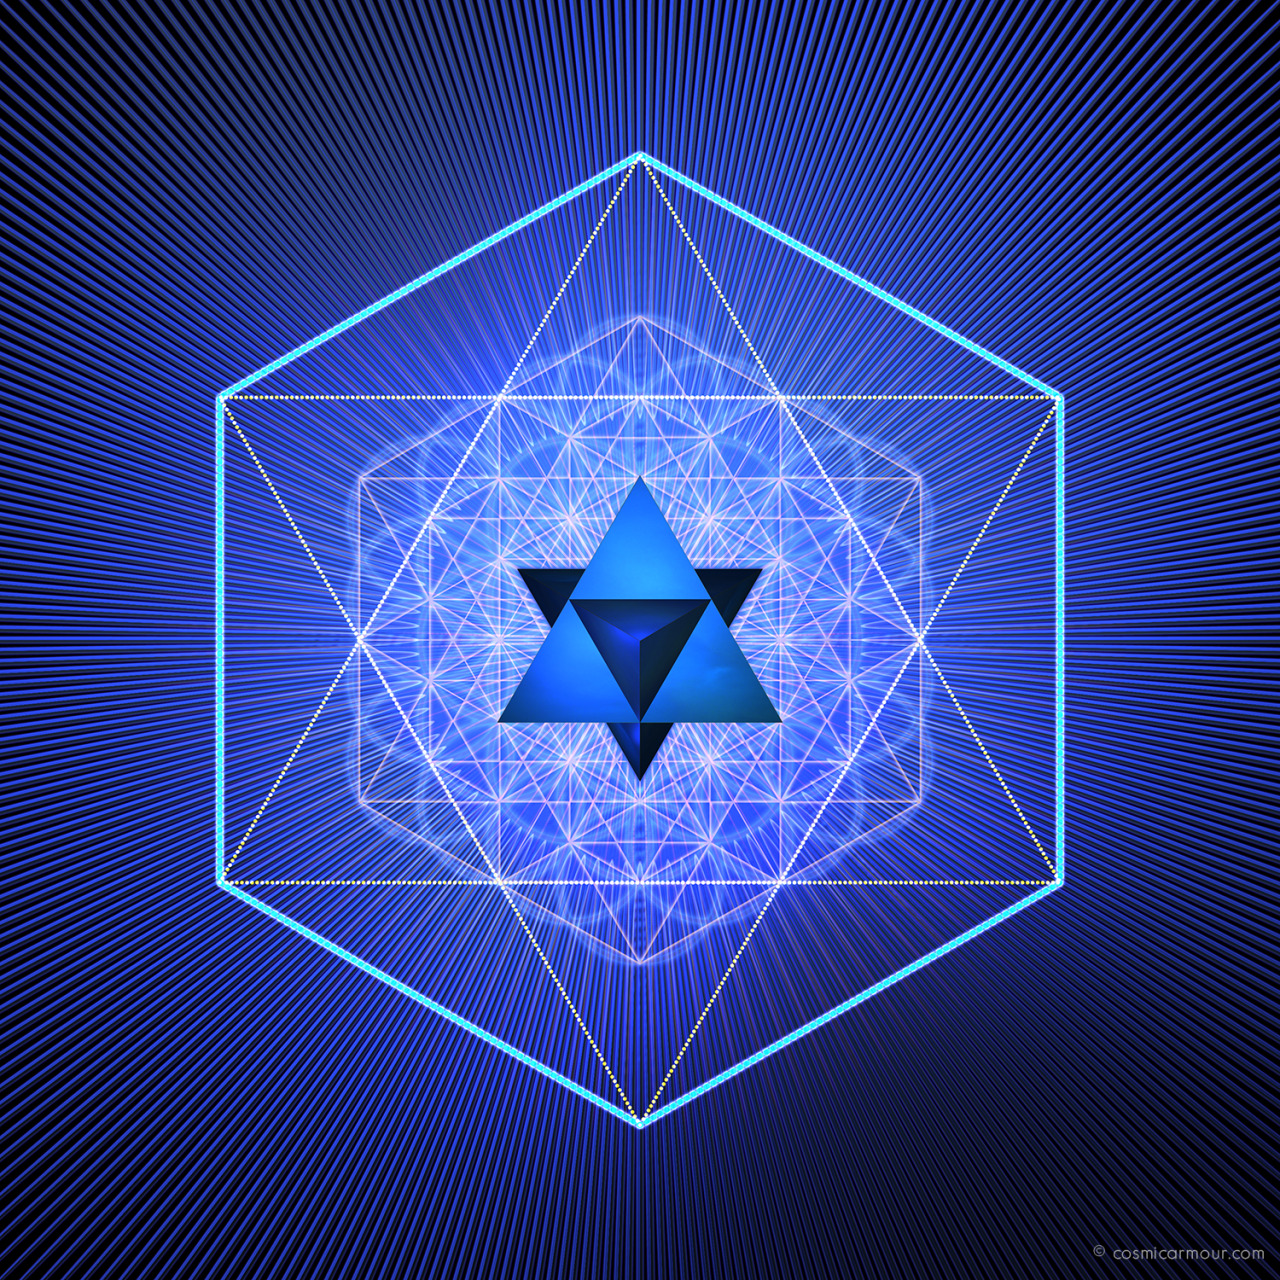 Star Tetrahedron with VE and Flower of Life - cosmicarmour.com